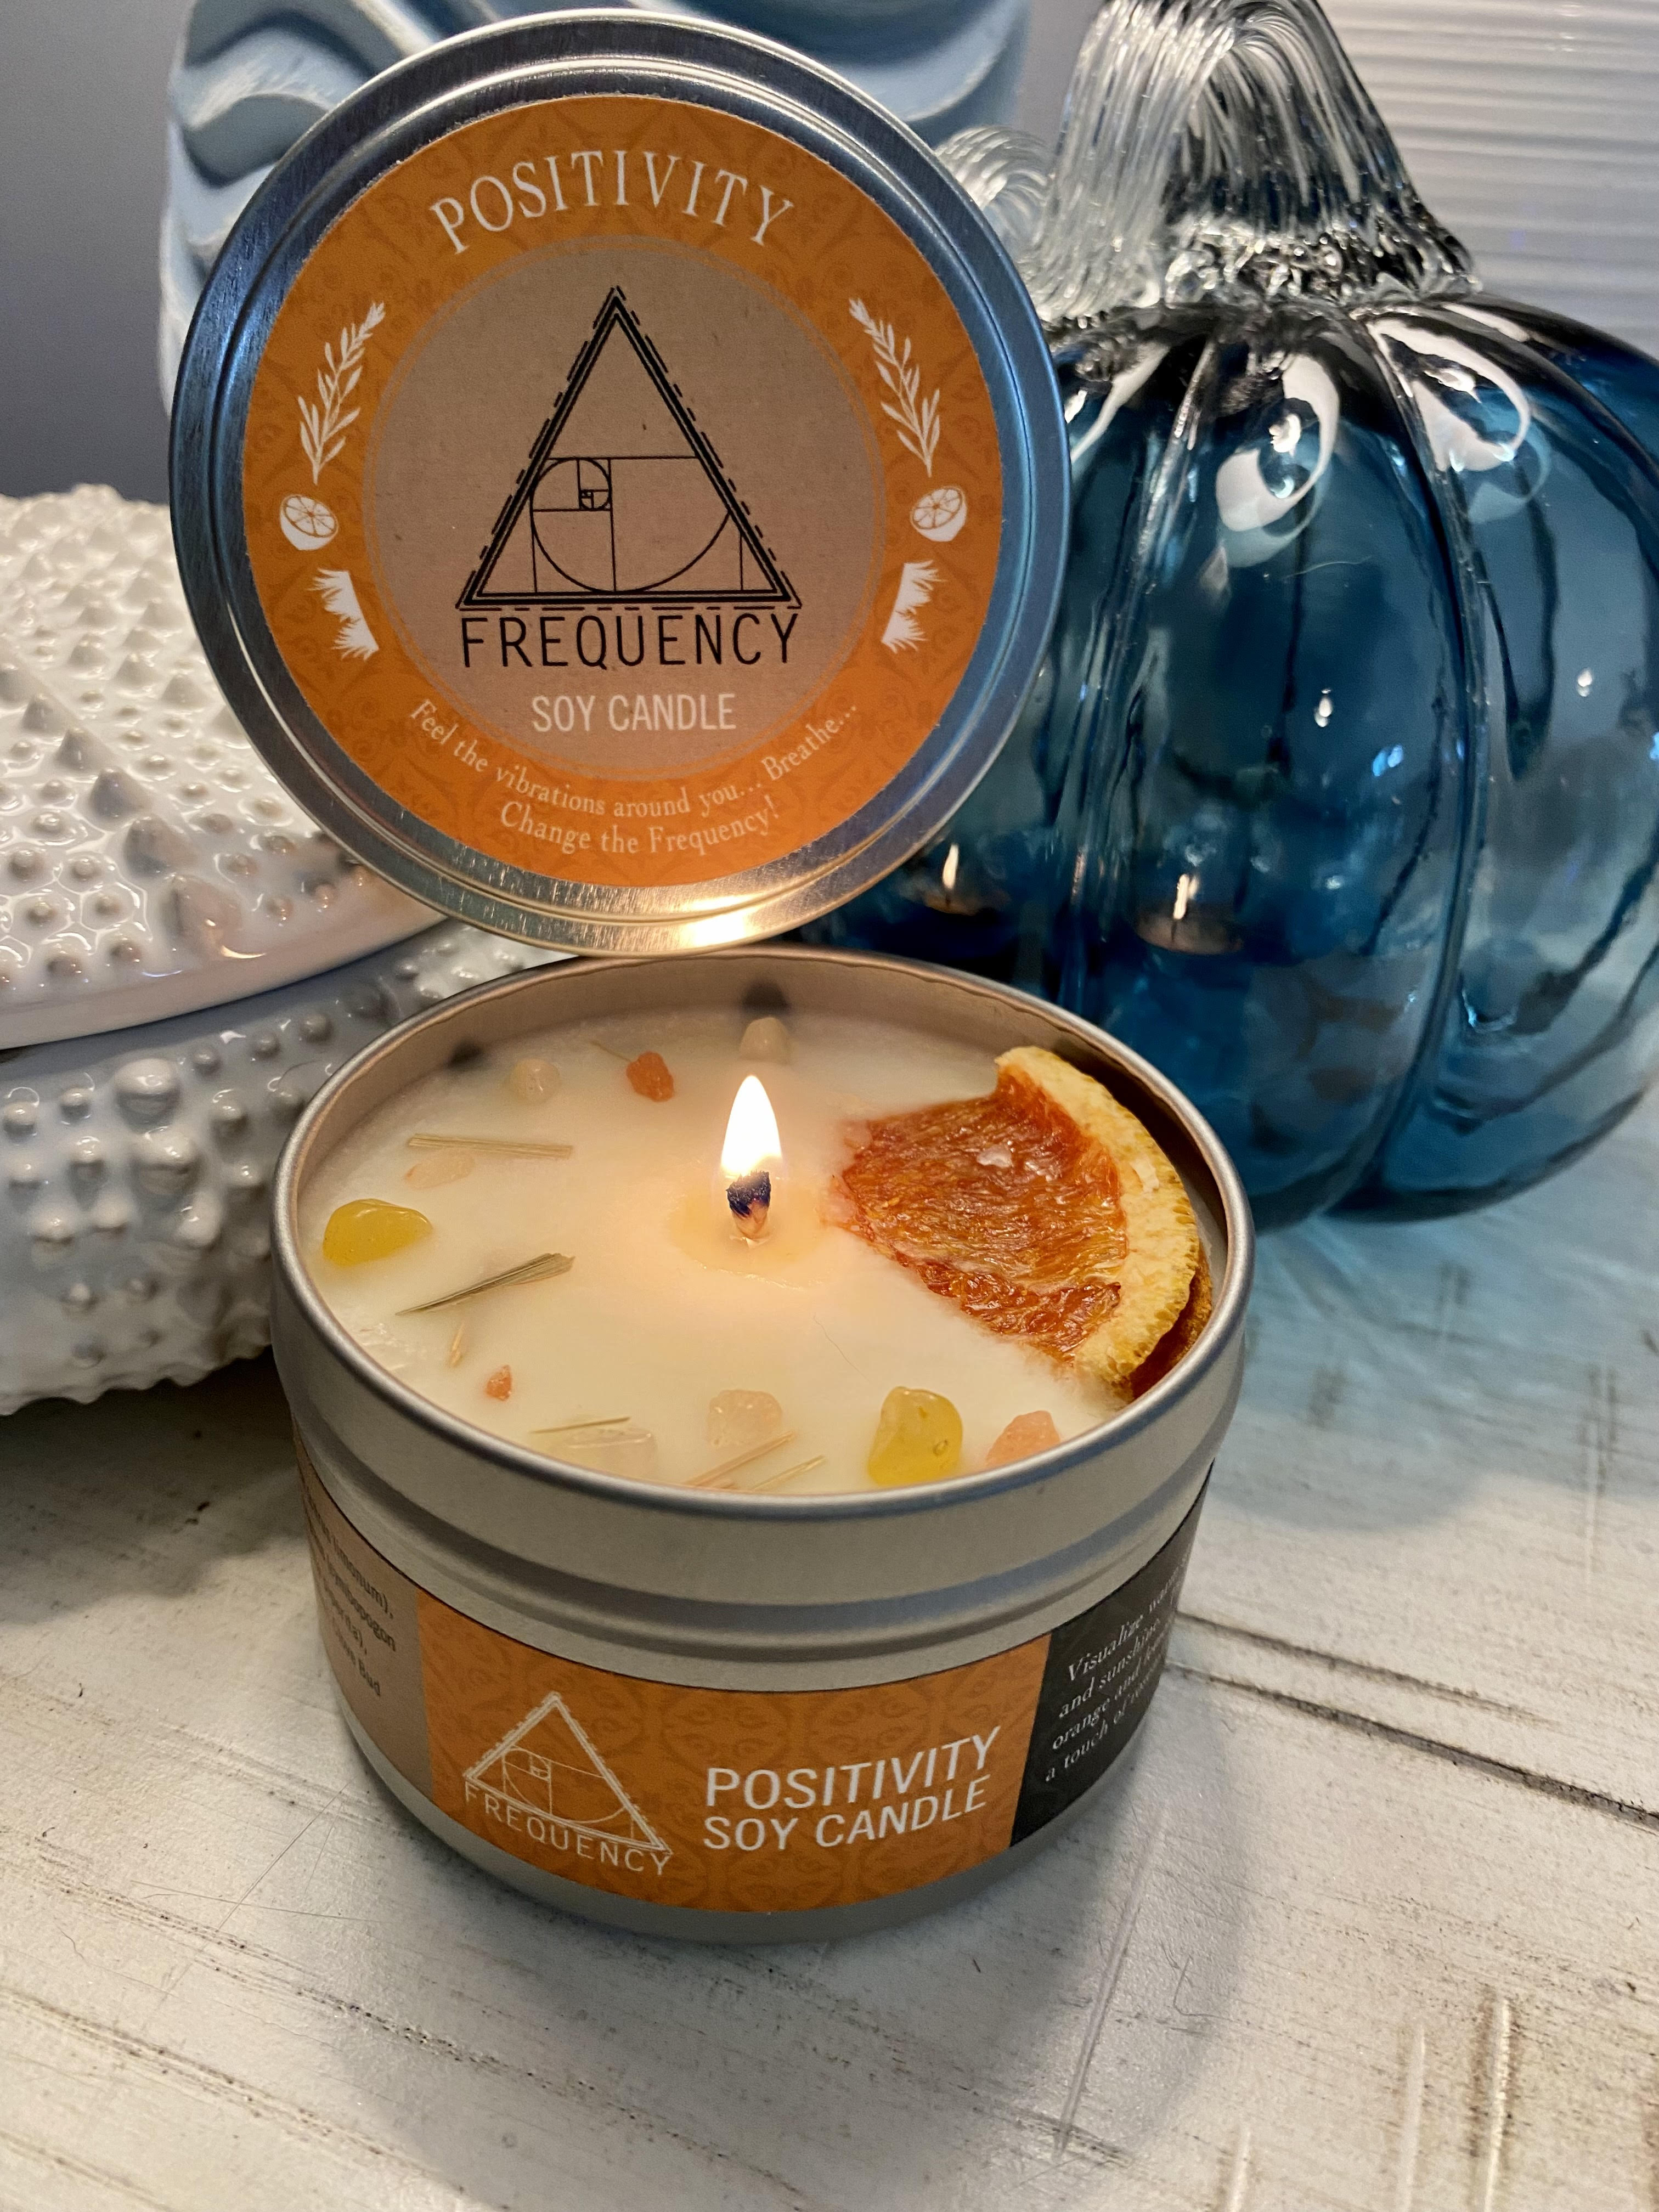 Crystal Positivity Soy Candle